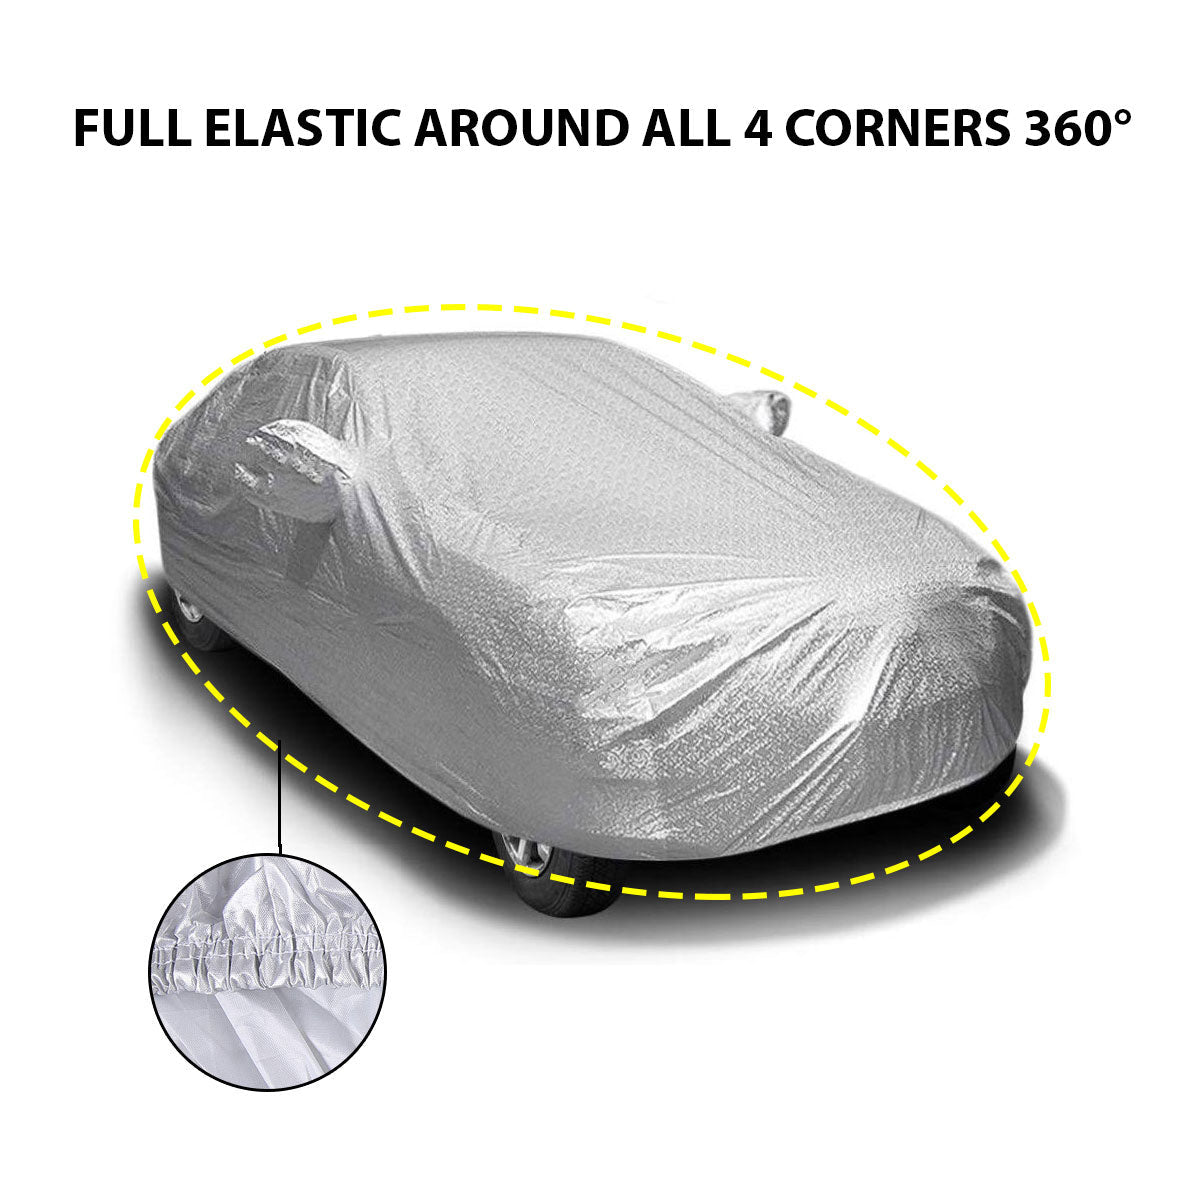 Oshotto Spyro Silver Anti Reflective, dustproof and Water Proof Car Body Cover with Mirror Pockets For Chevrolet Spark